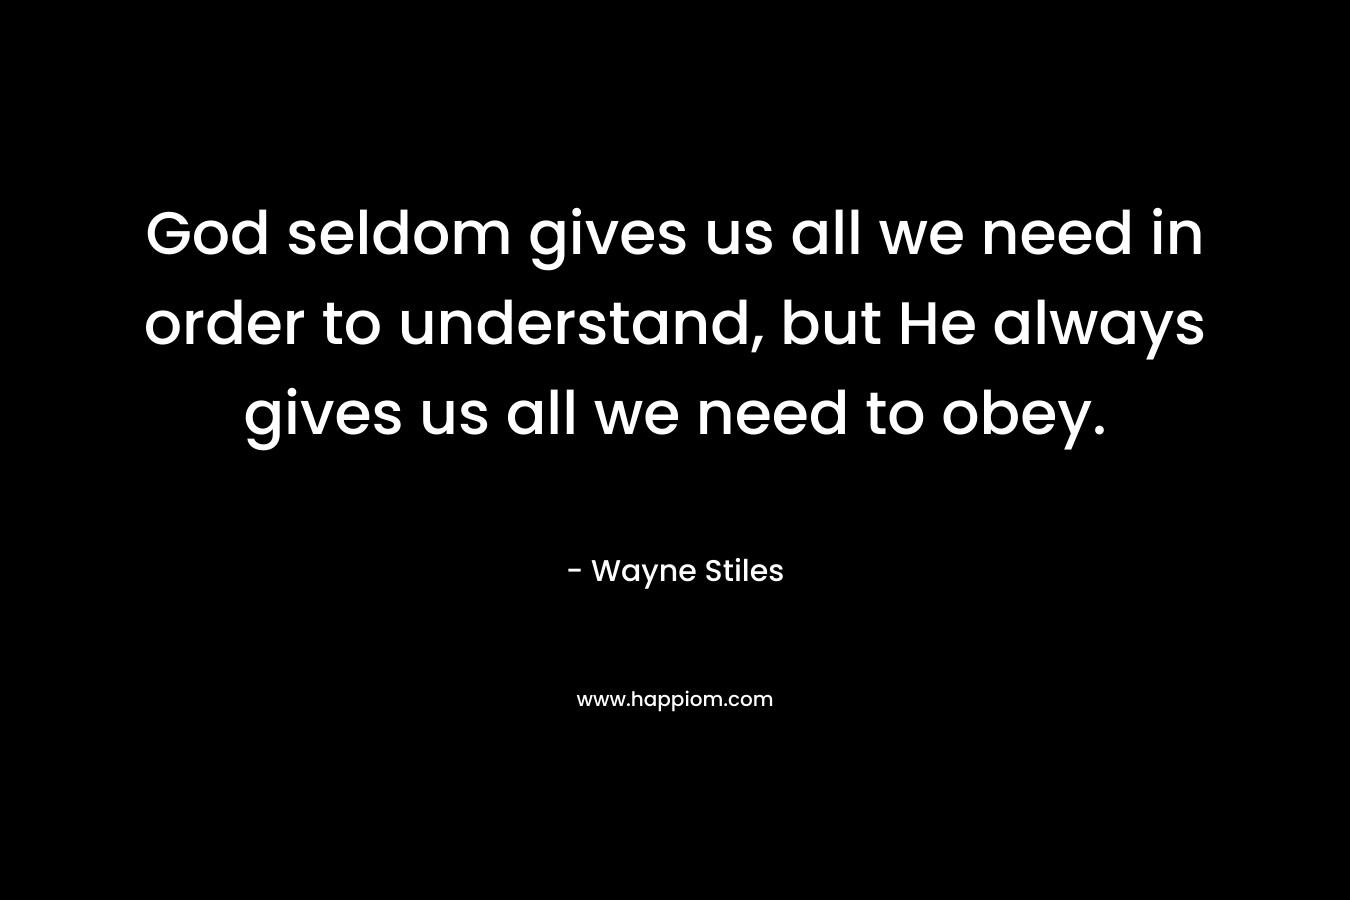 God seldom gives us all we need in order to understand, but He always gives us all we need to obey.